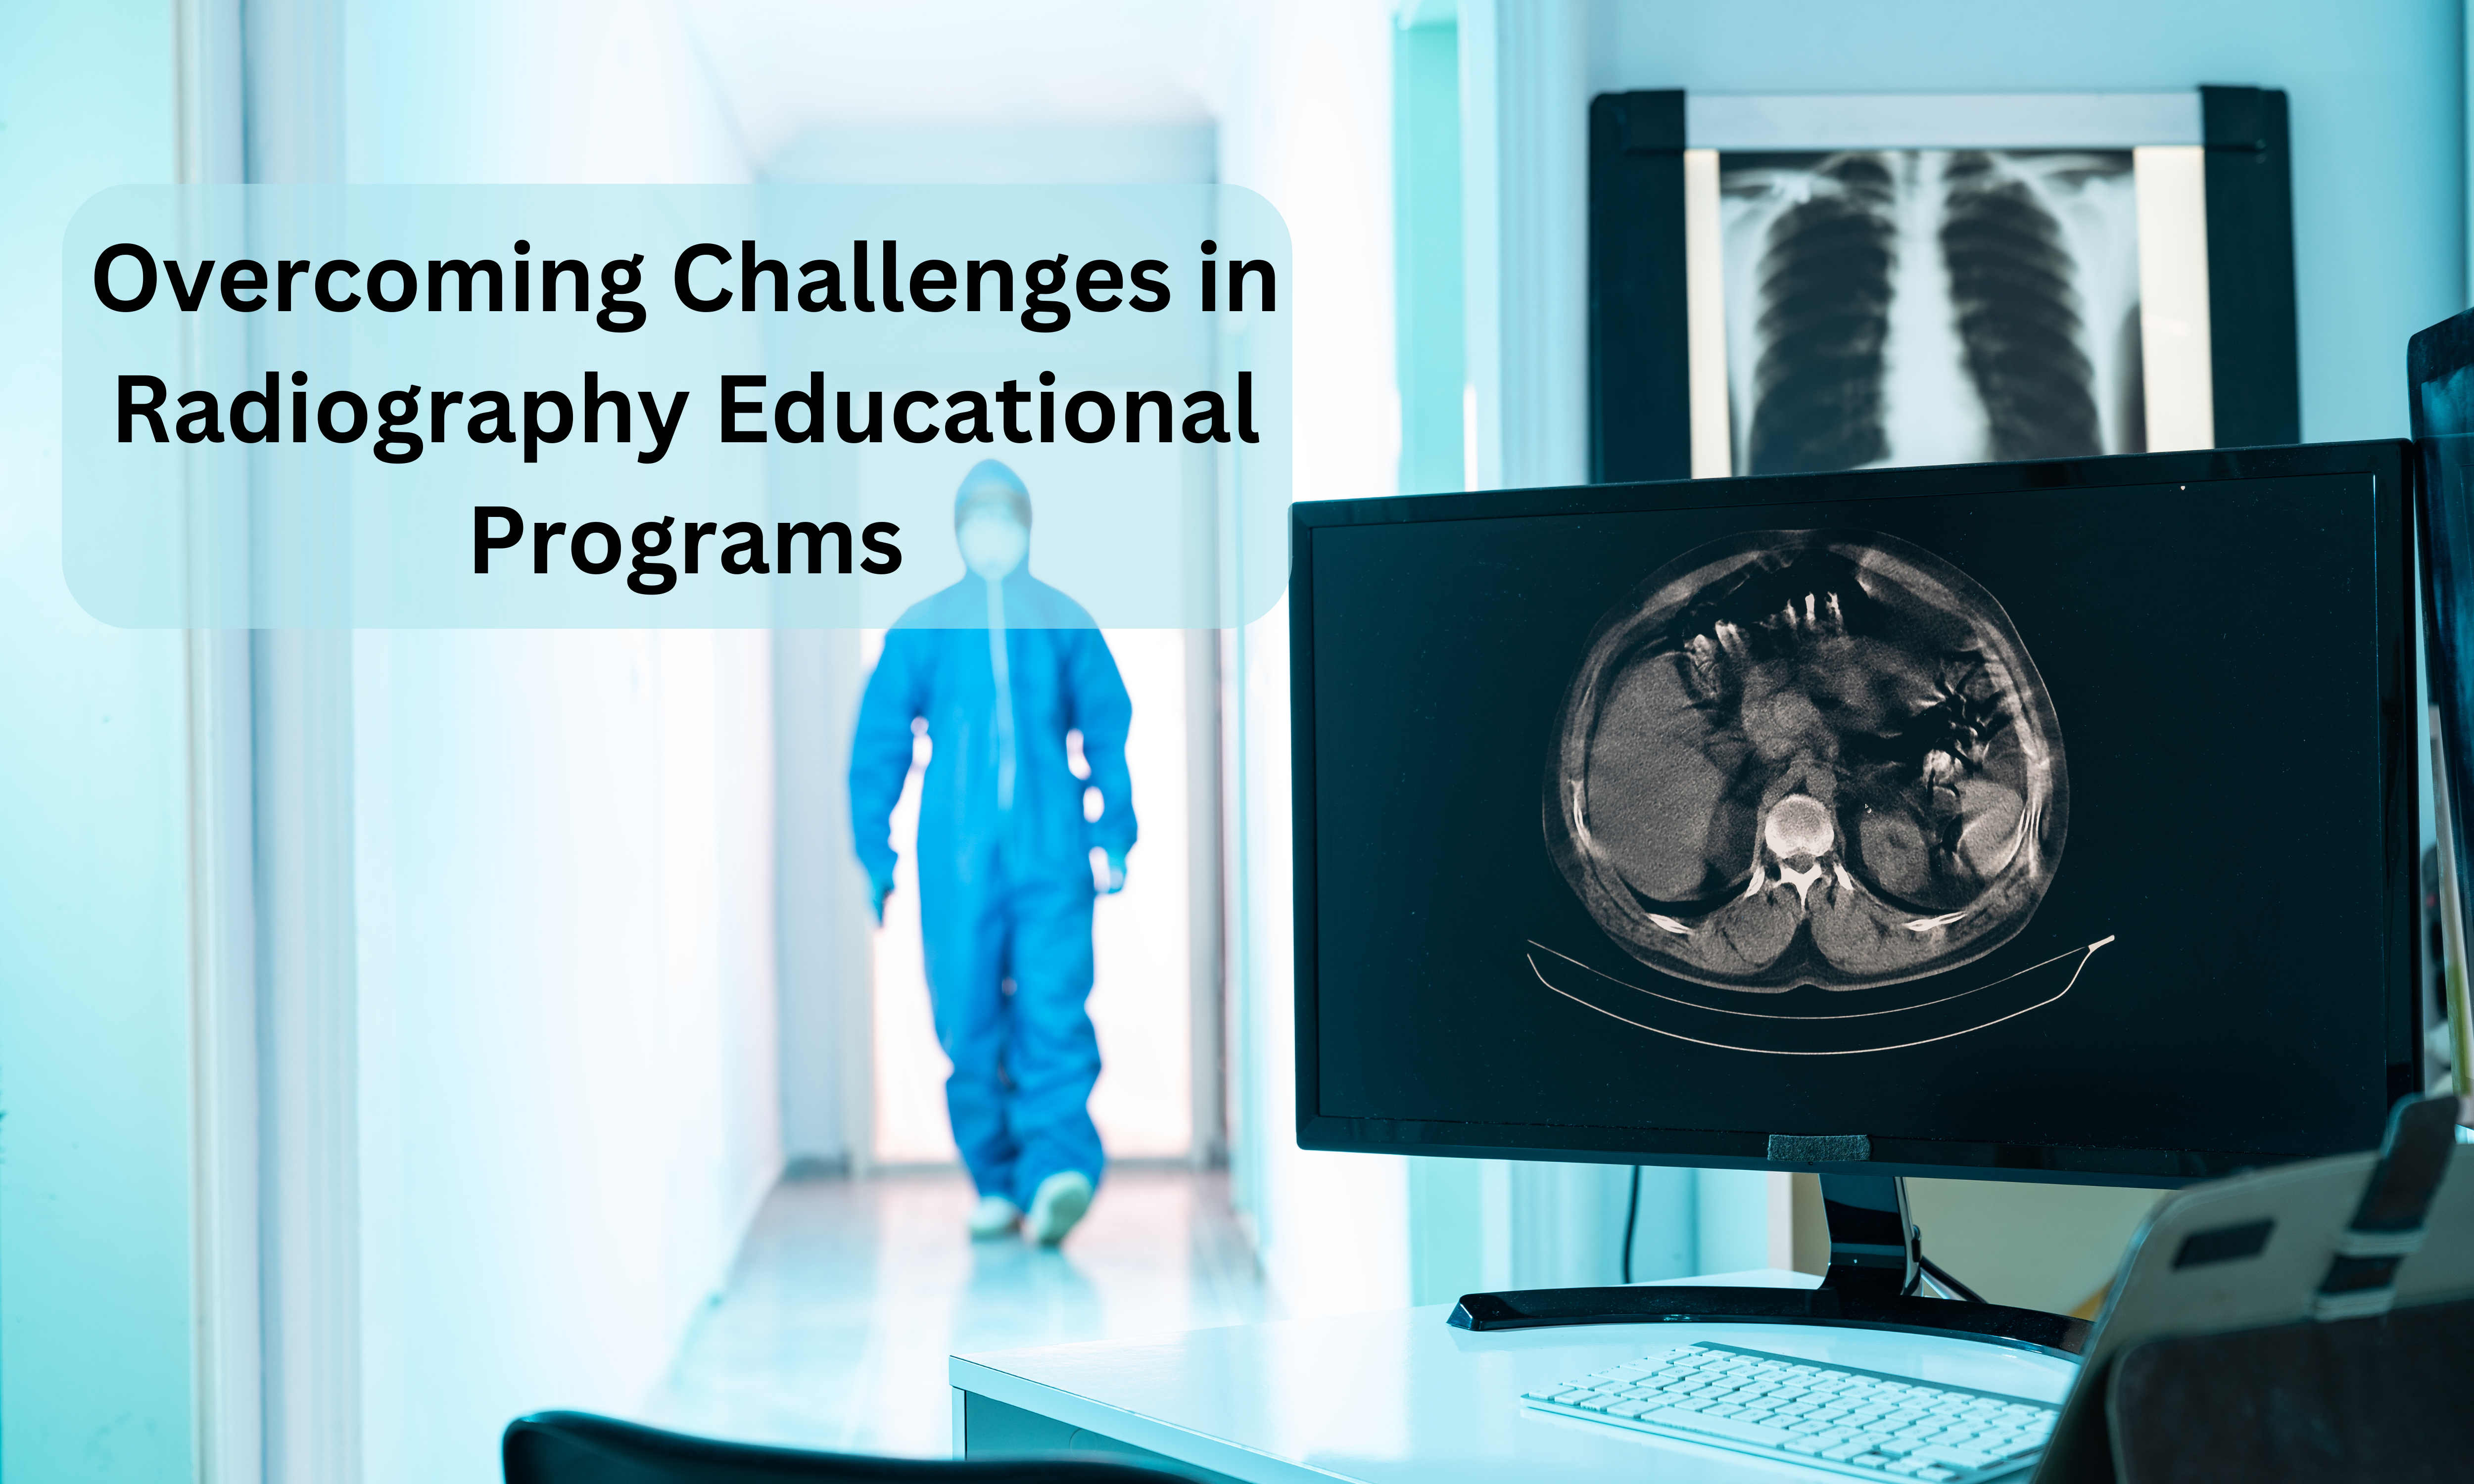 Overcoming Challenges in Radiography Educational Programs